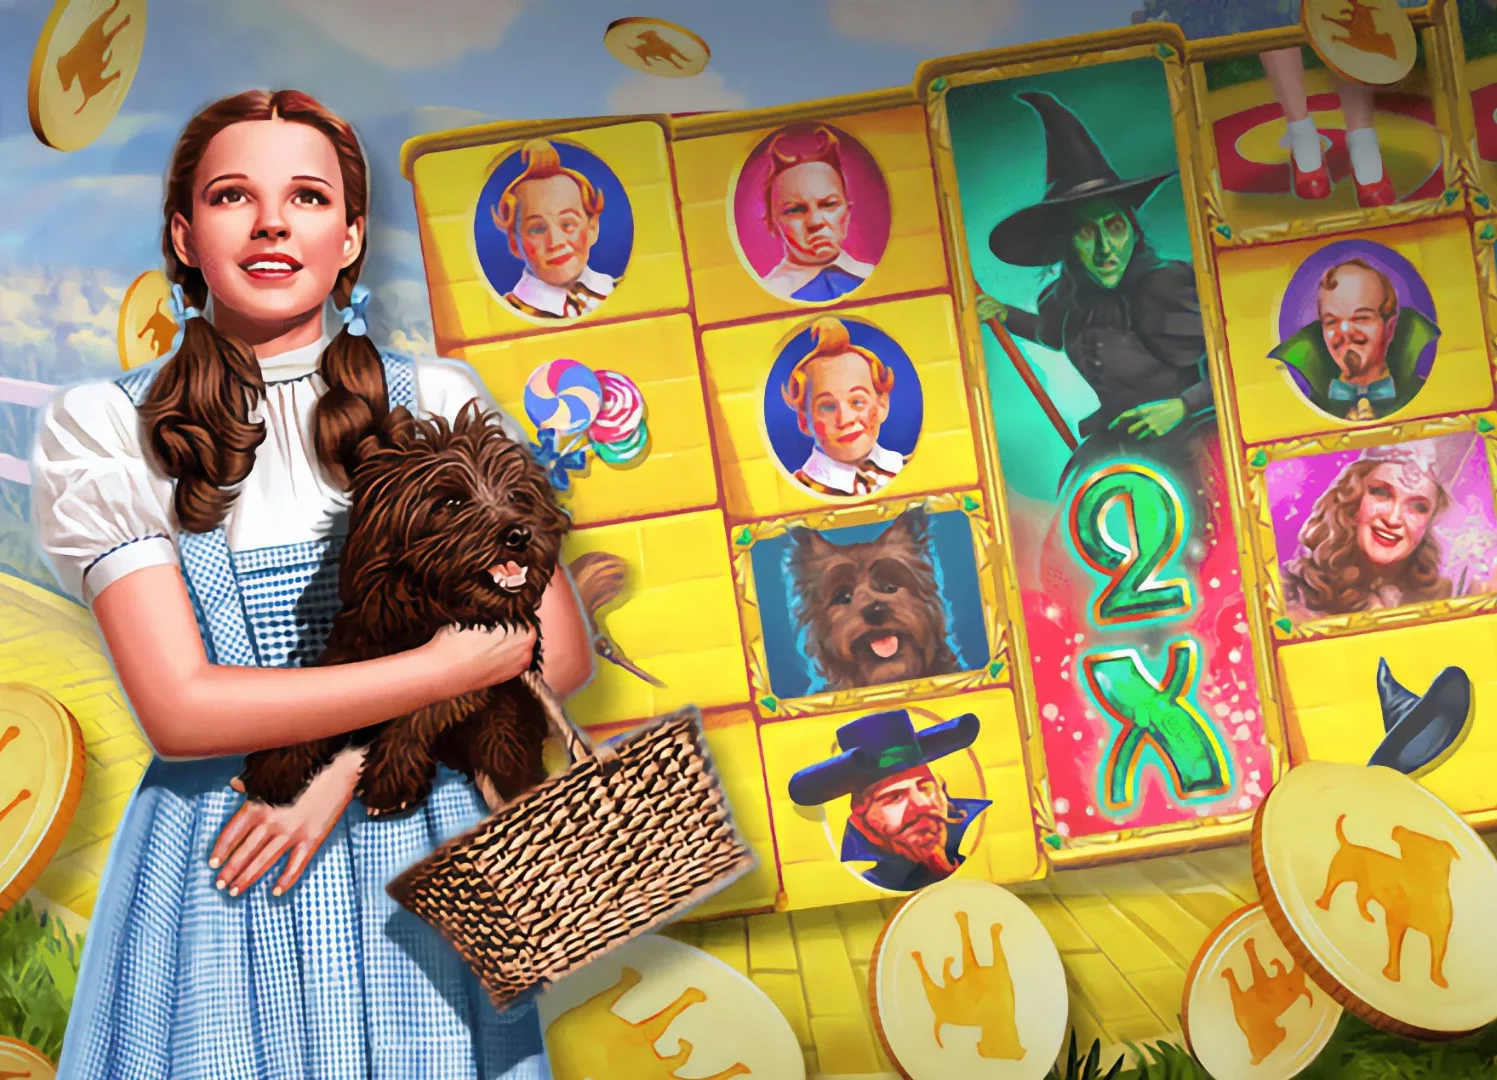 How To Get Free Wizard of Oz Credits?